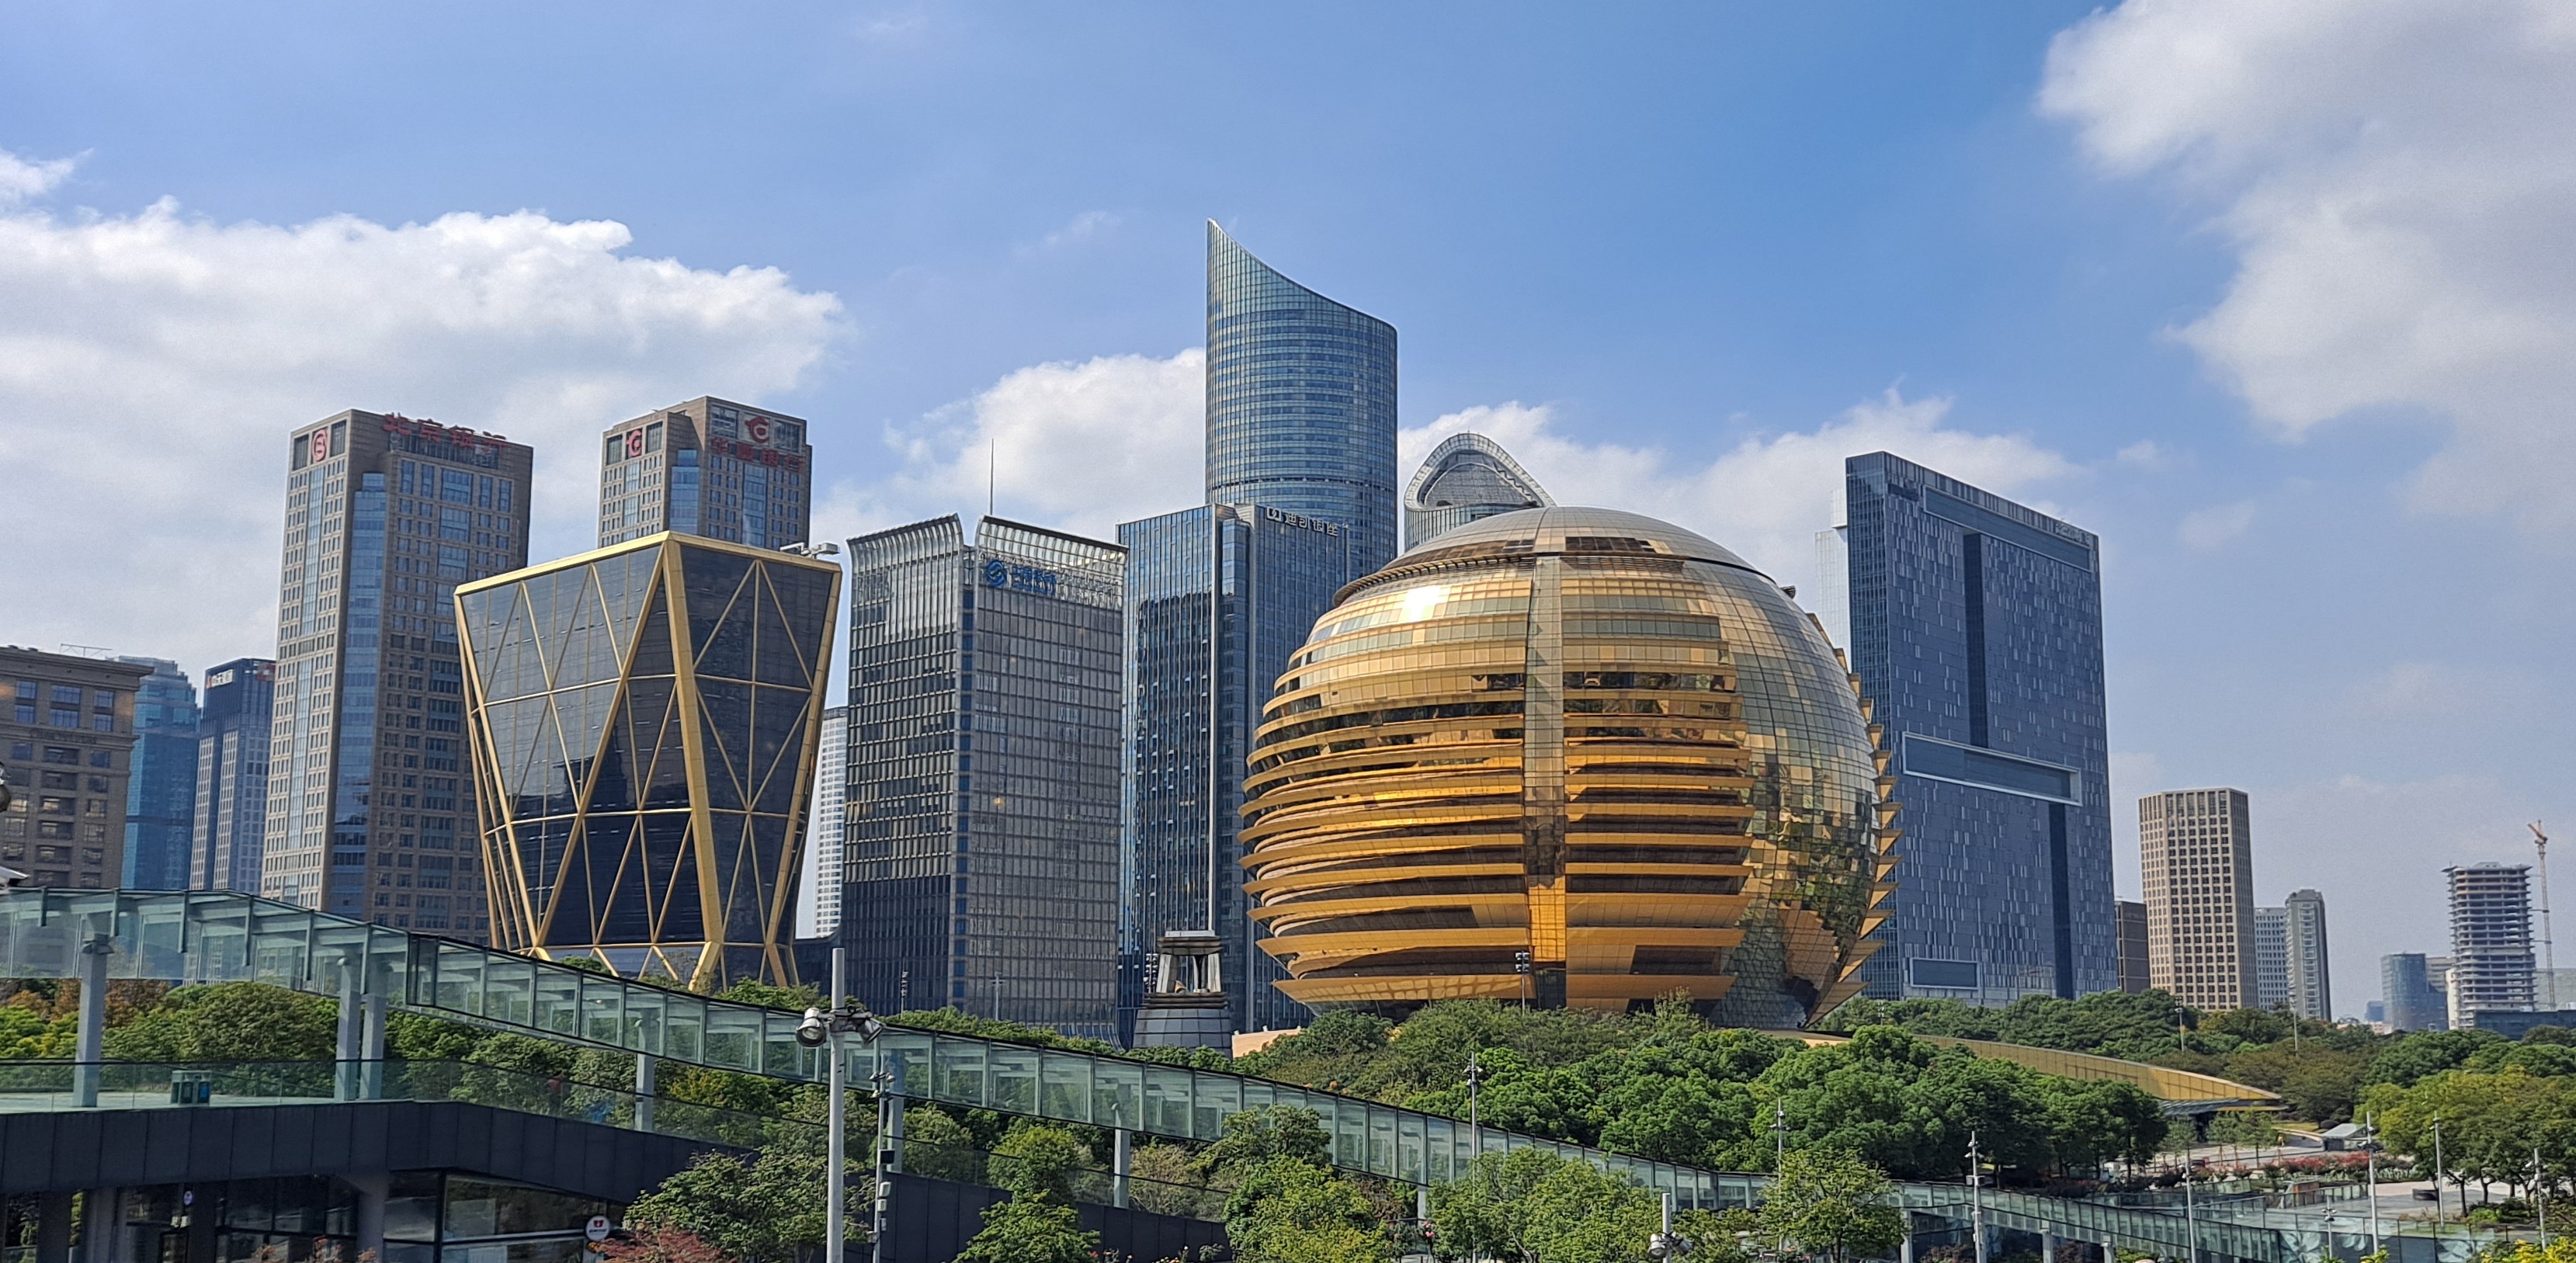 Shanghai's skyline featuring a golden building in China.